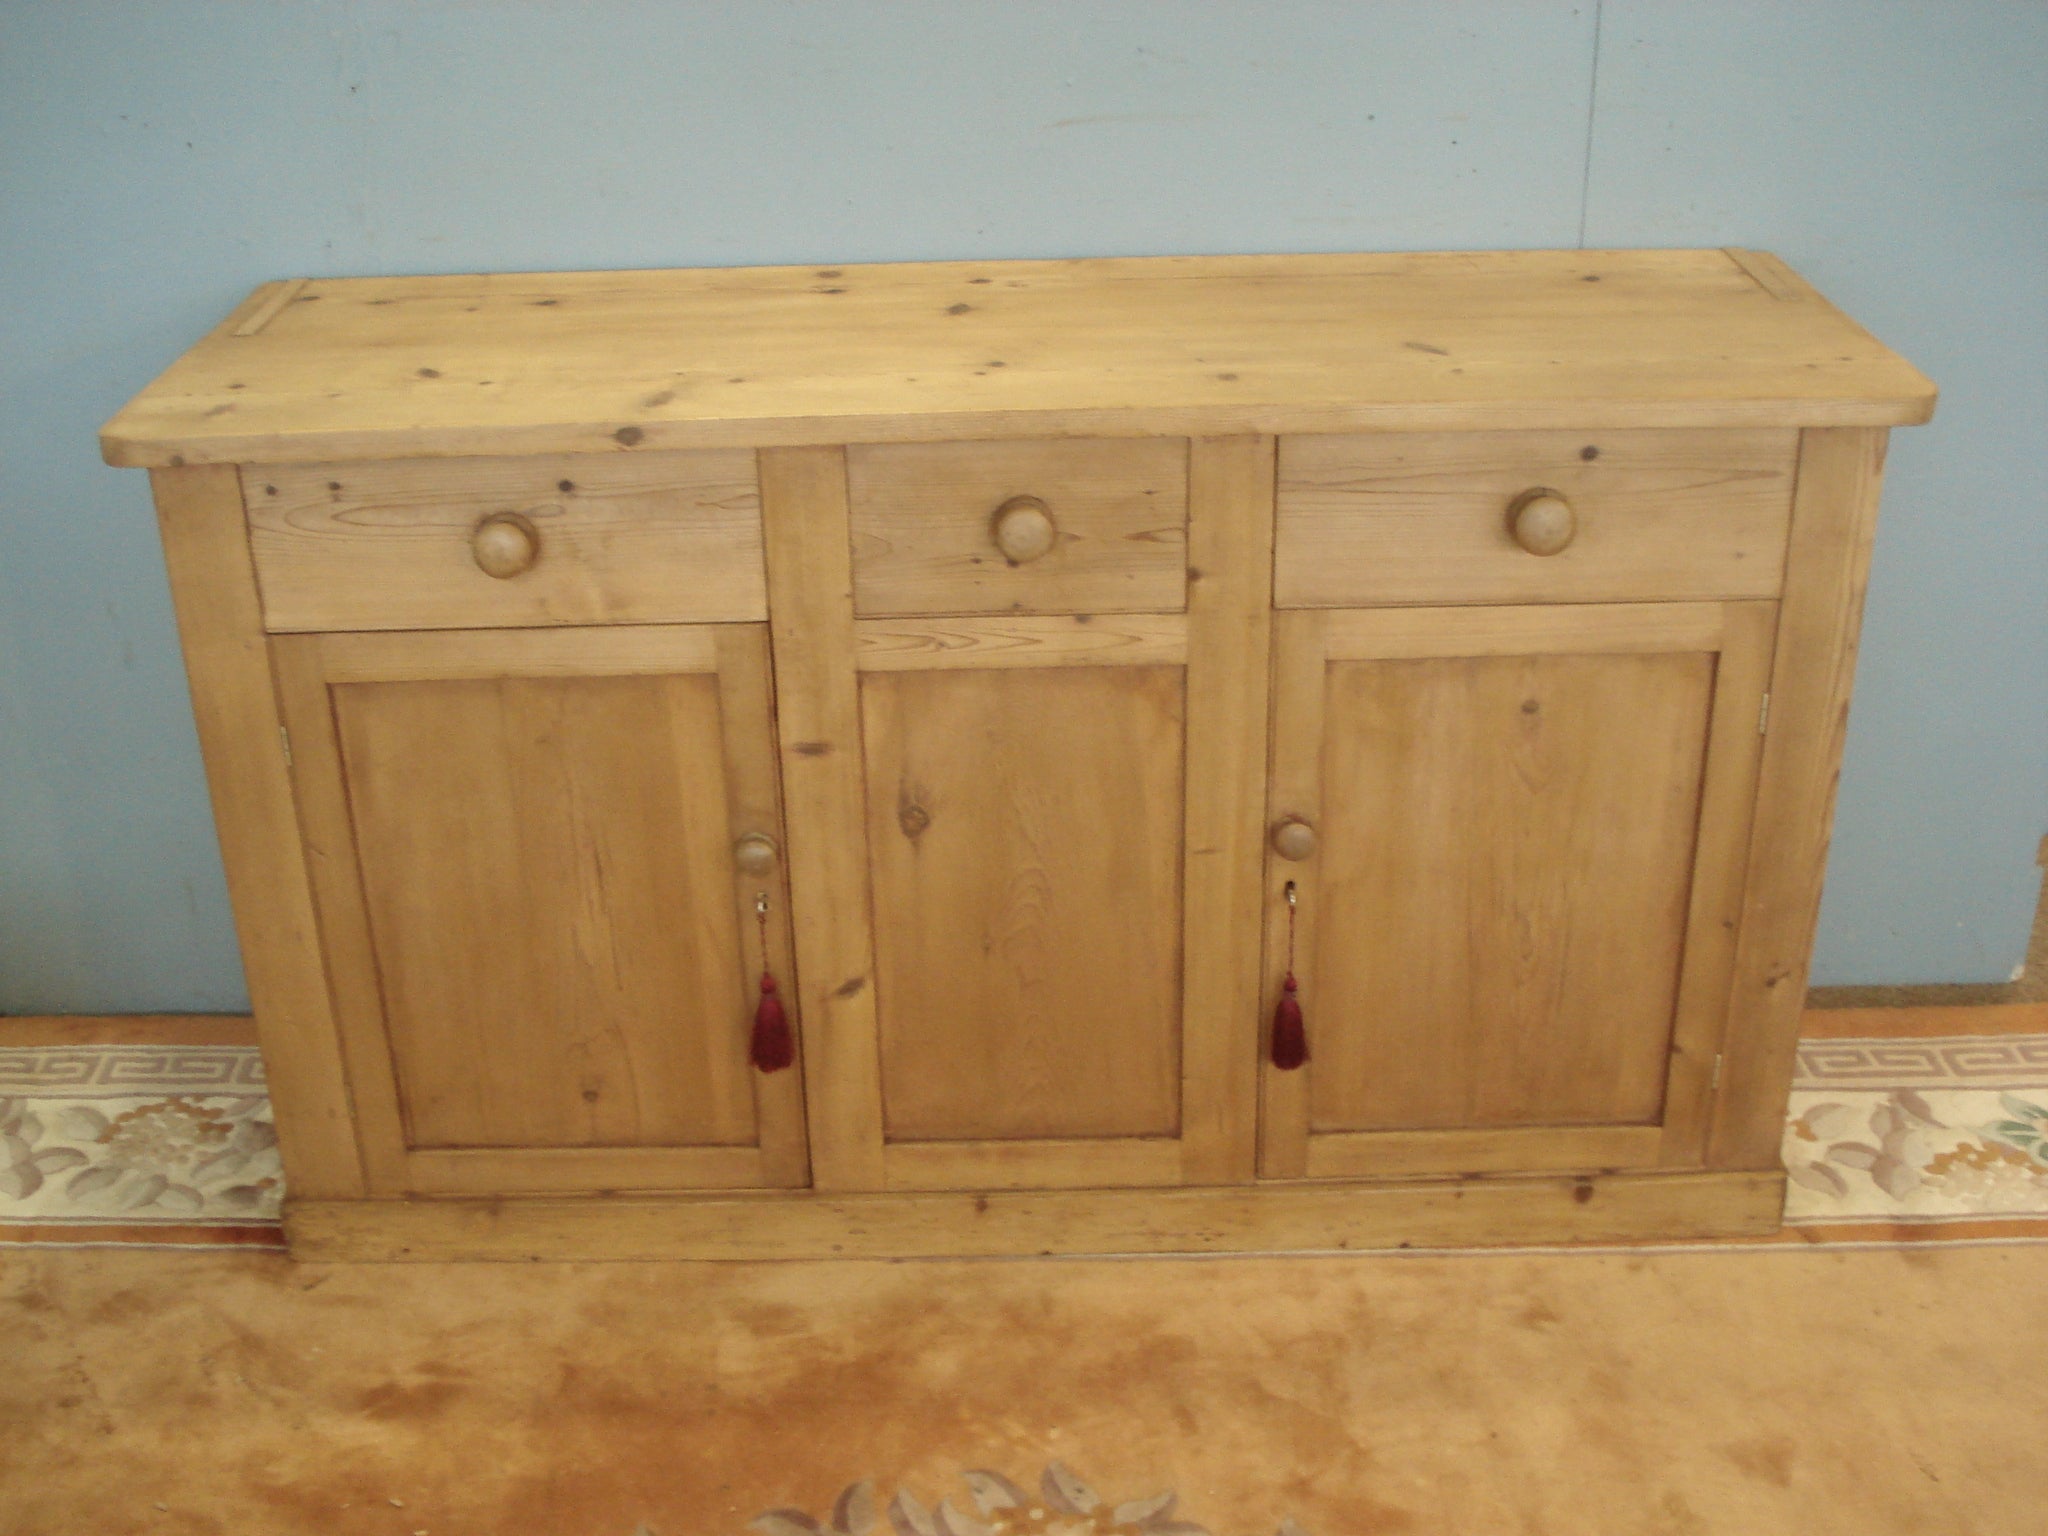 Three drawer, two door antique pine dresser base. The plate rack is available.